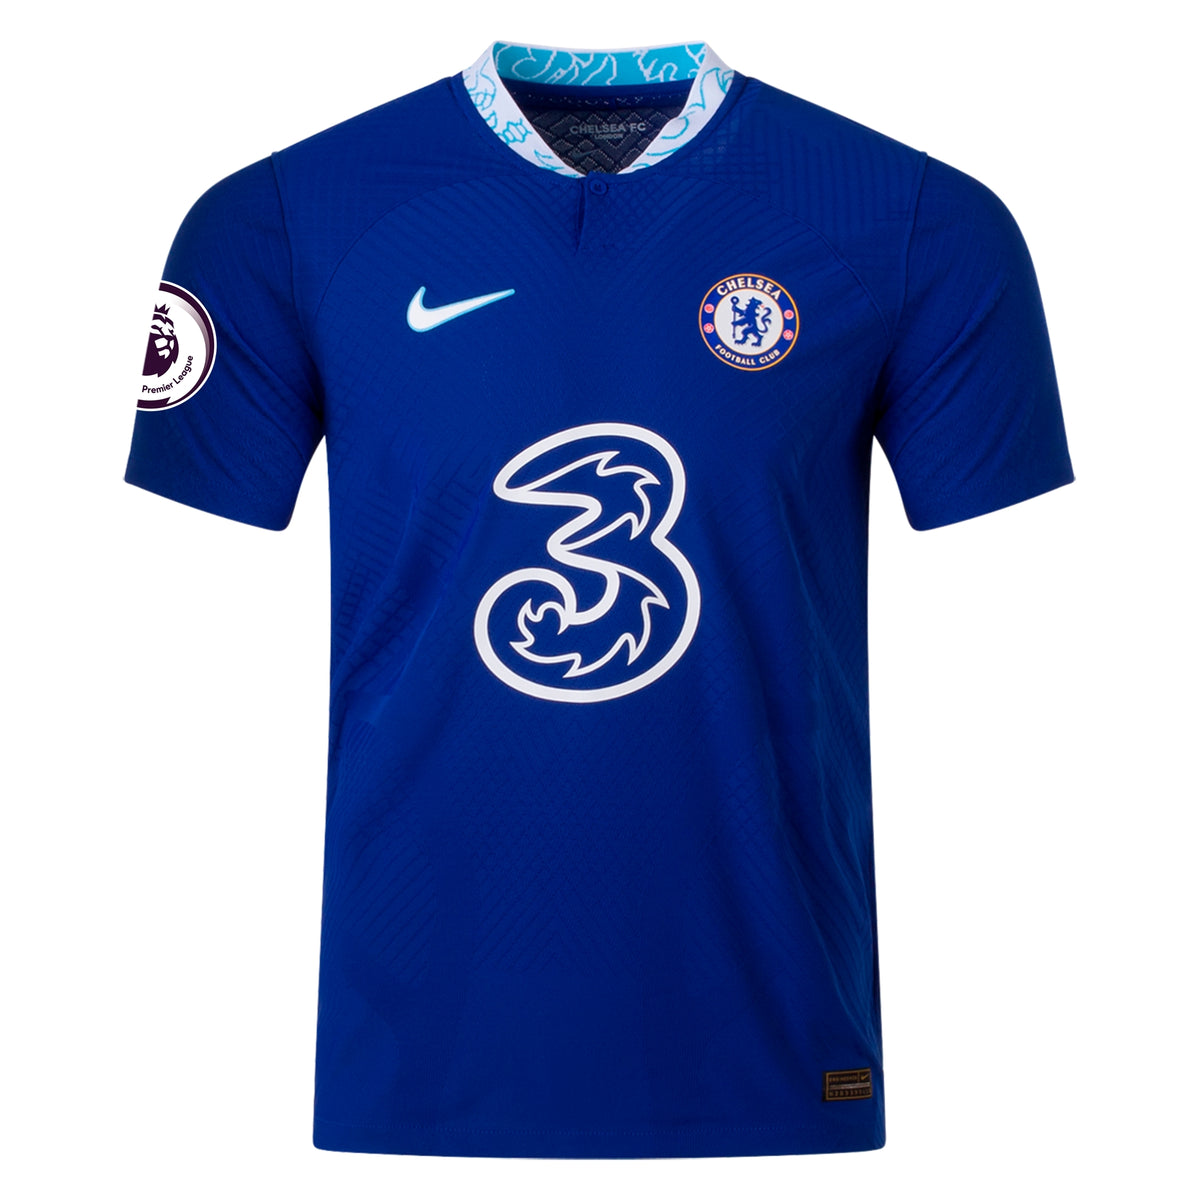 Men's Authentic Nike Pulisic Chelsea Home Jersey 22/23 DJ7641-496 ...